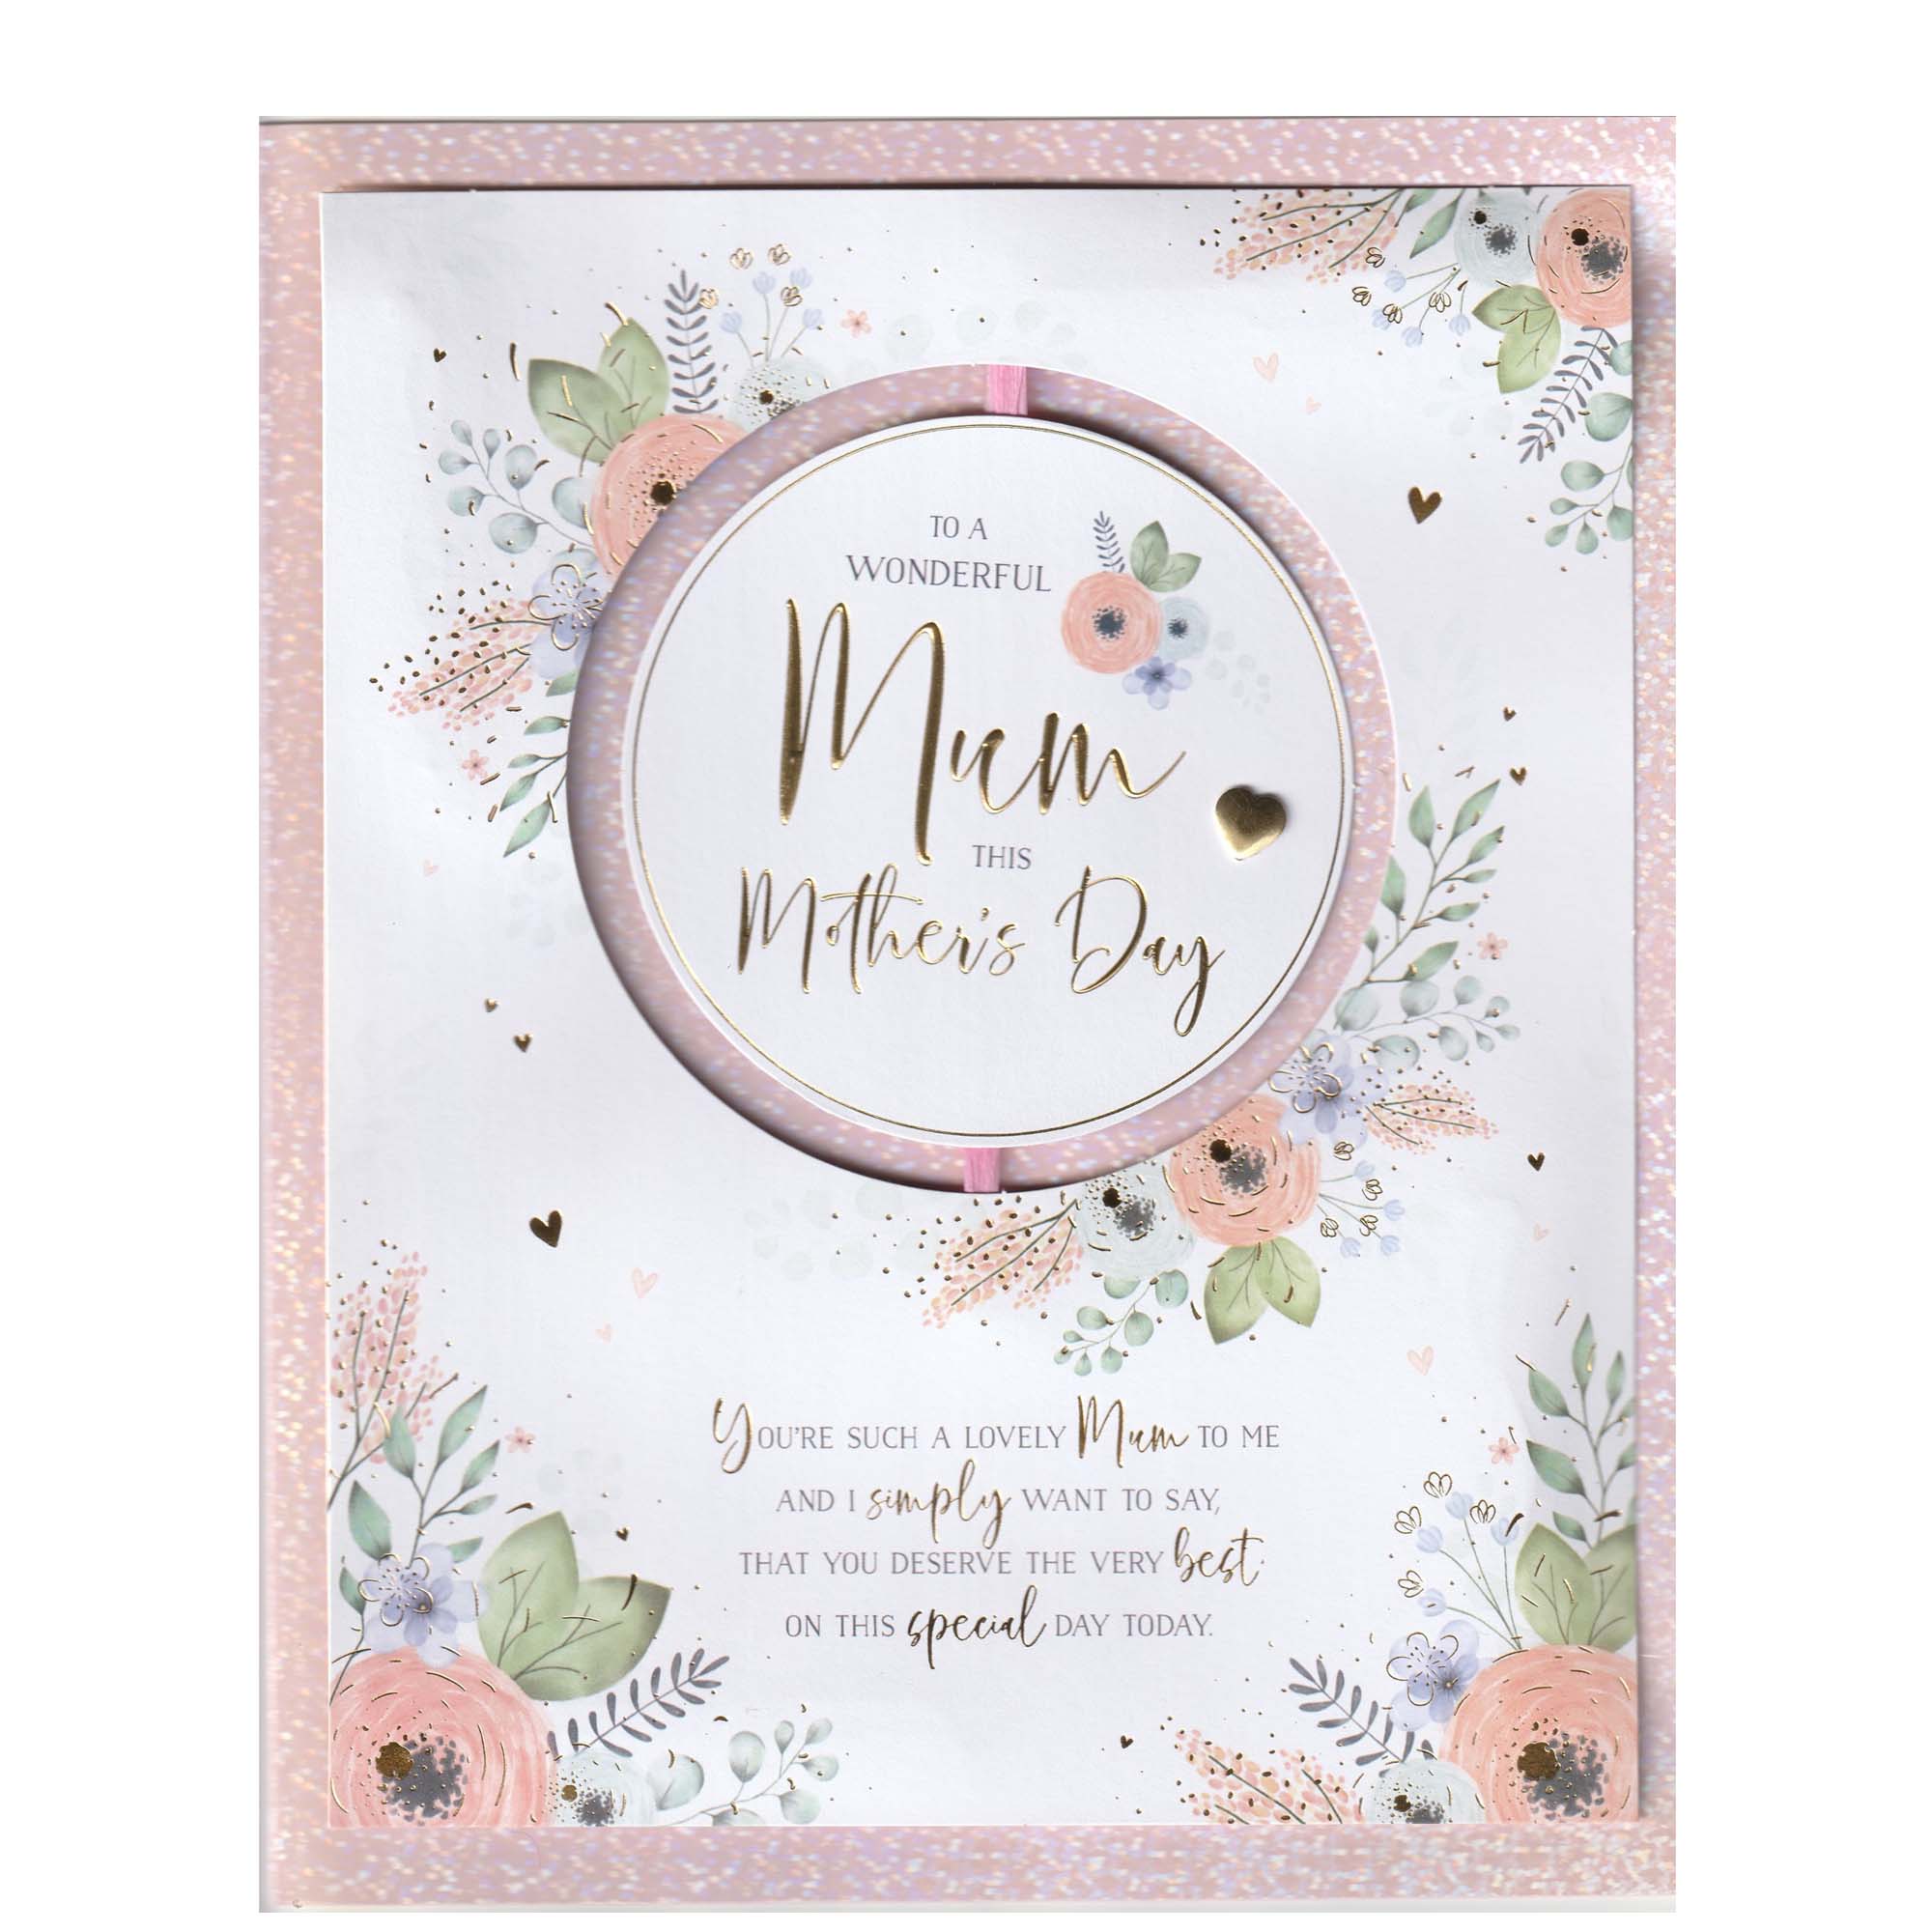 To A Wonderful Mum Mothers Day Greeting Card